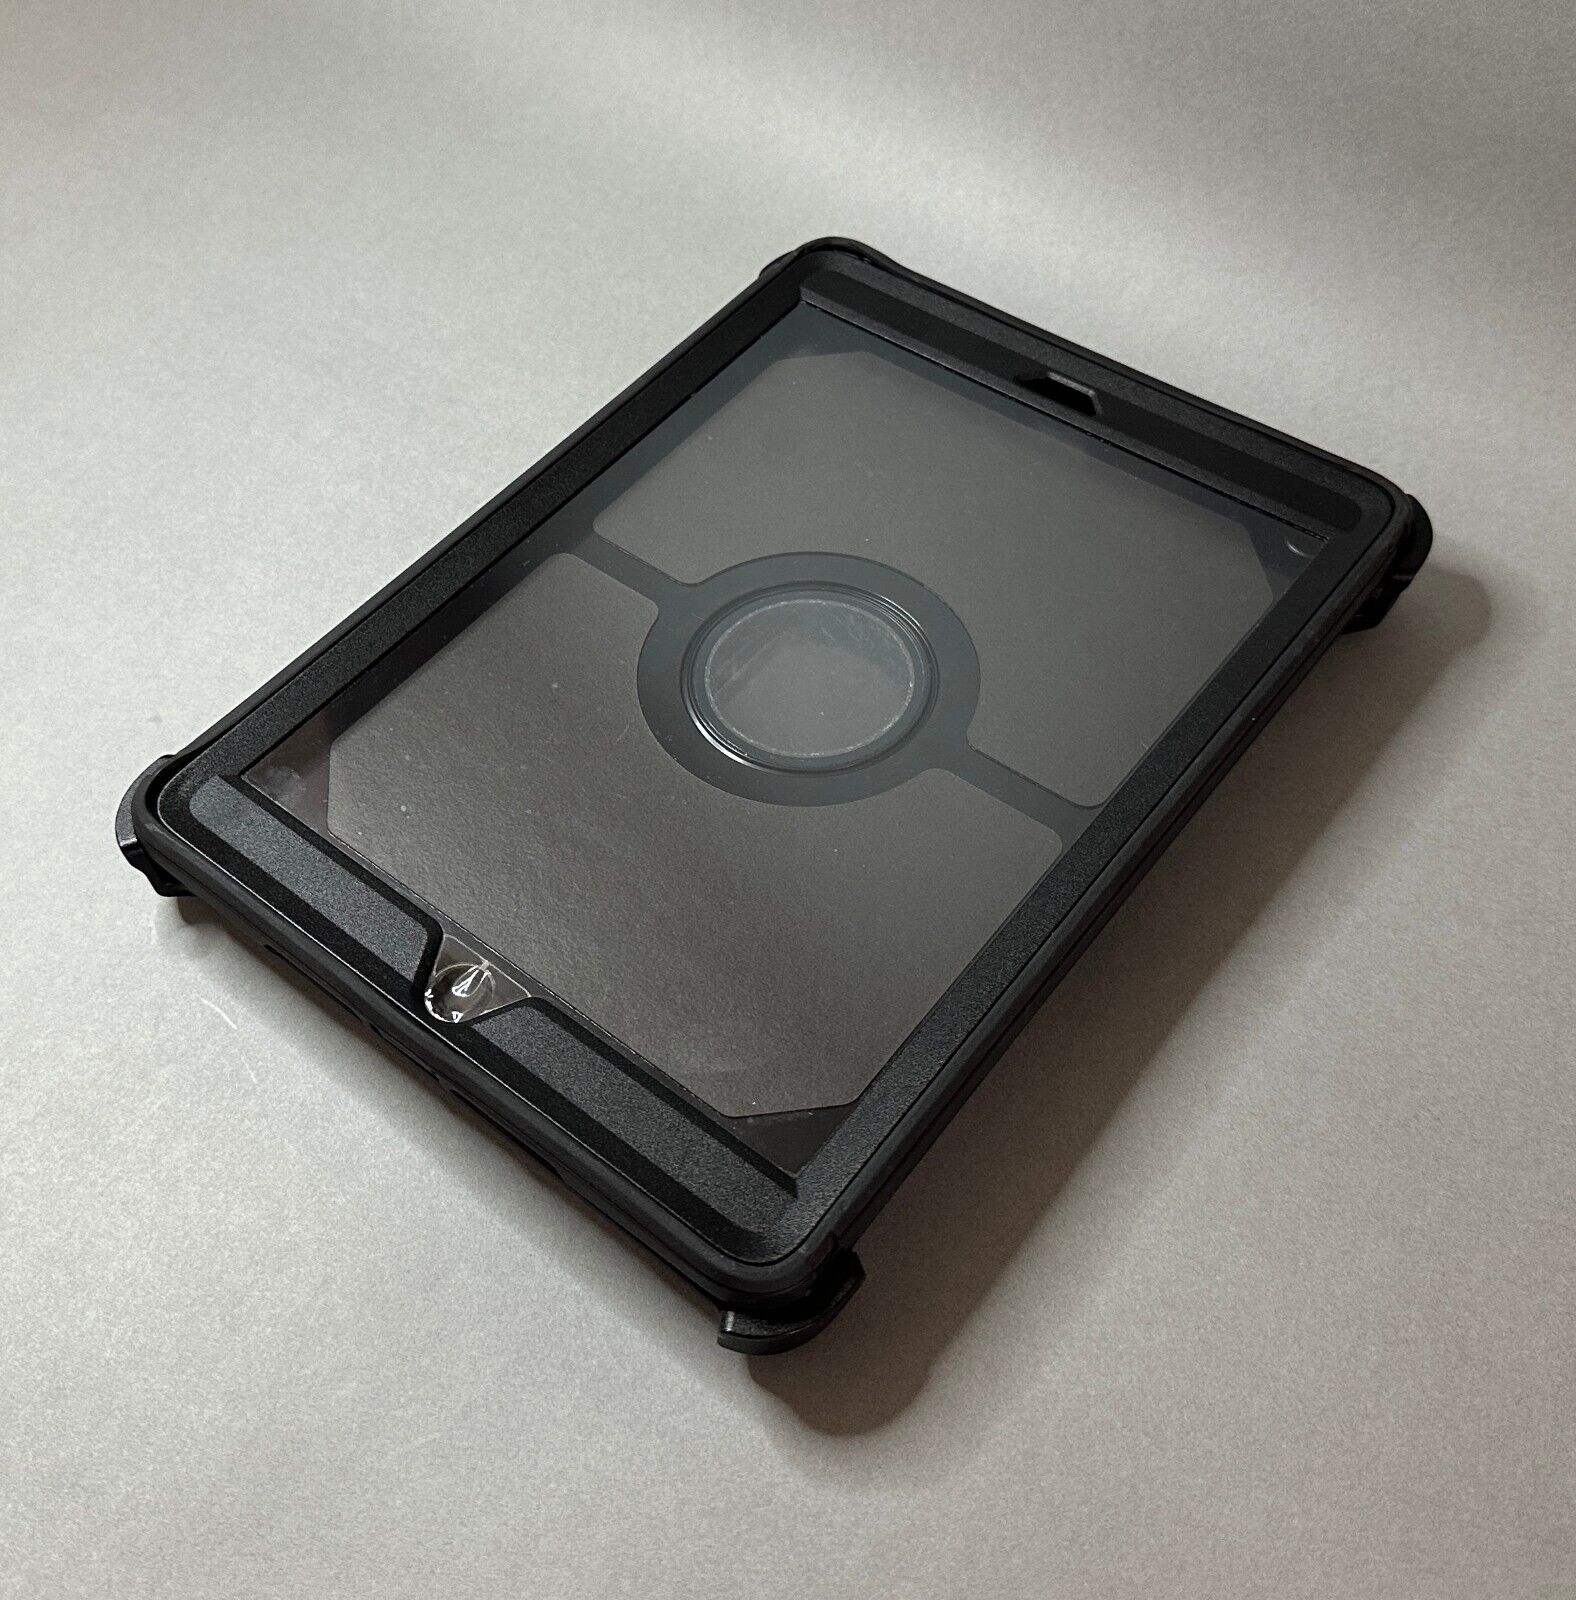 Used OtterBox Defender Series Case Screen Protector and Stand iPad 5th/6th Gen.